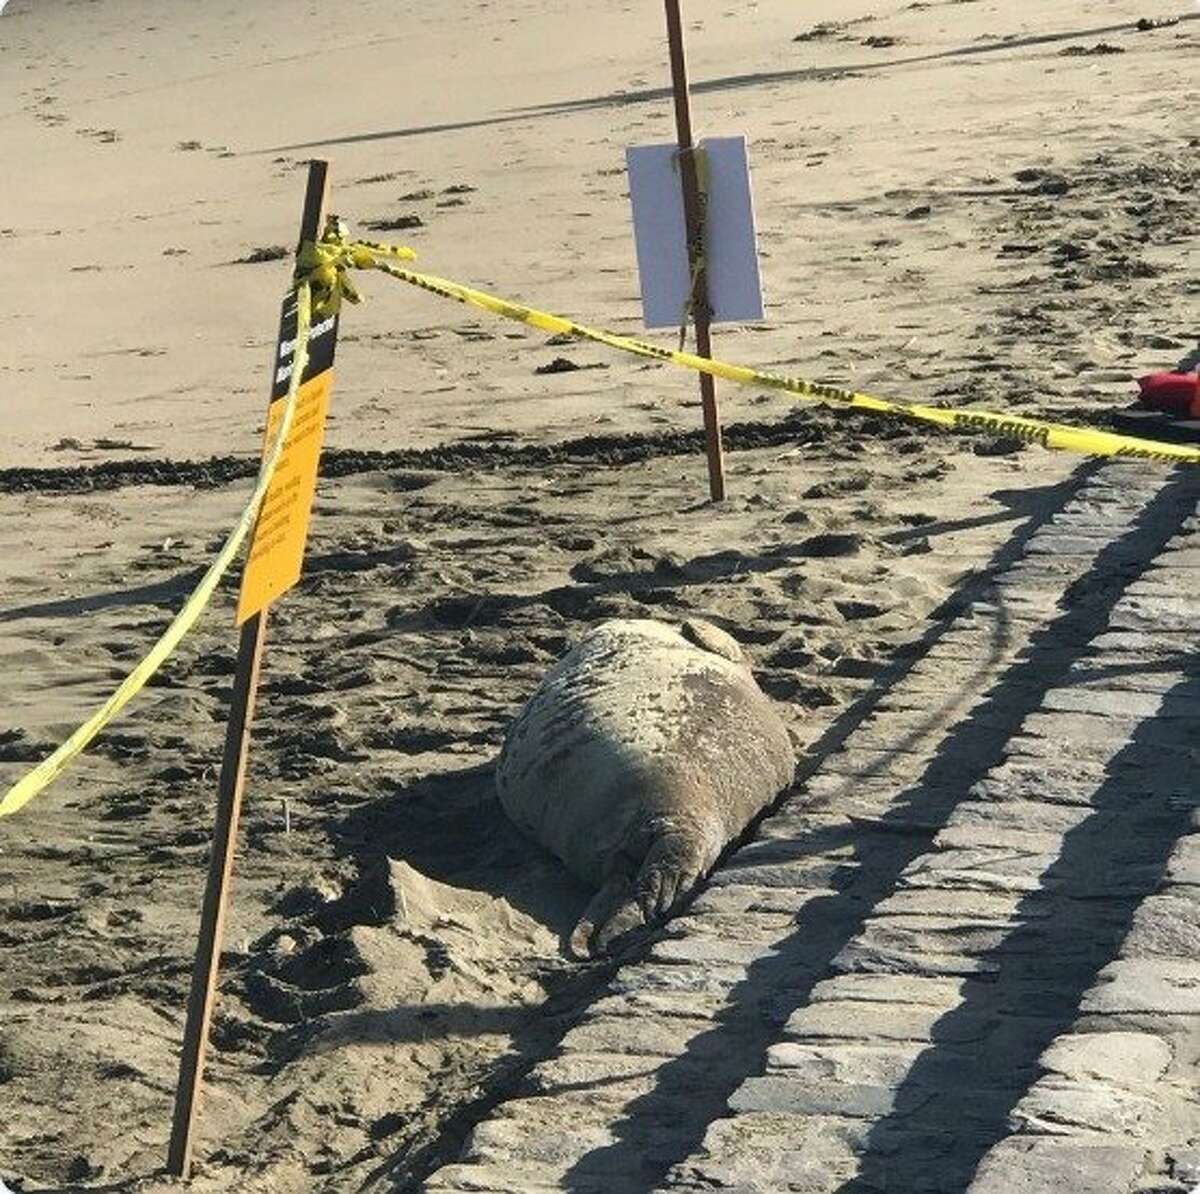 This photo from the Marine Mammal Center shows a young northern elephant seal that temporarily took up residence at San Francisco's Aquatic Park.